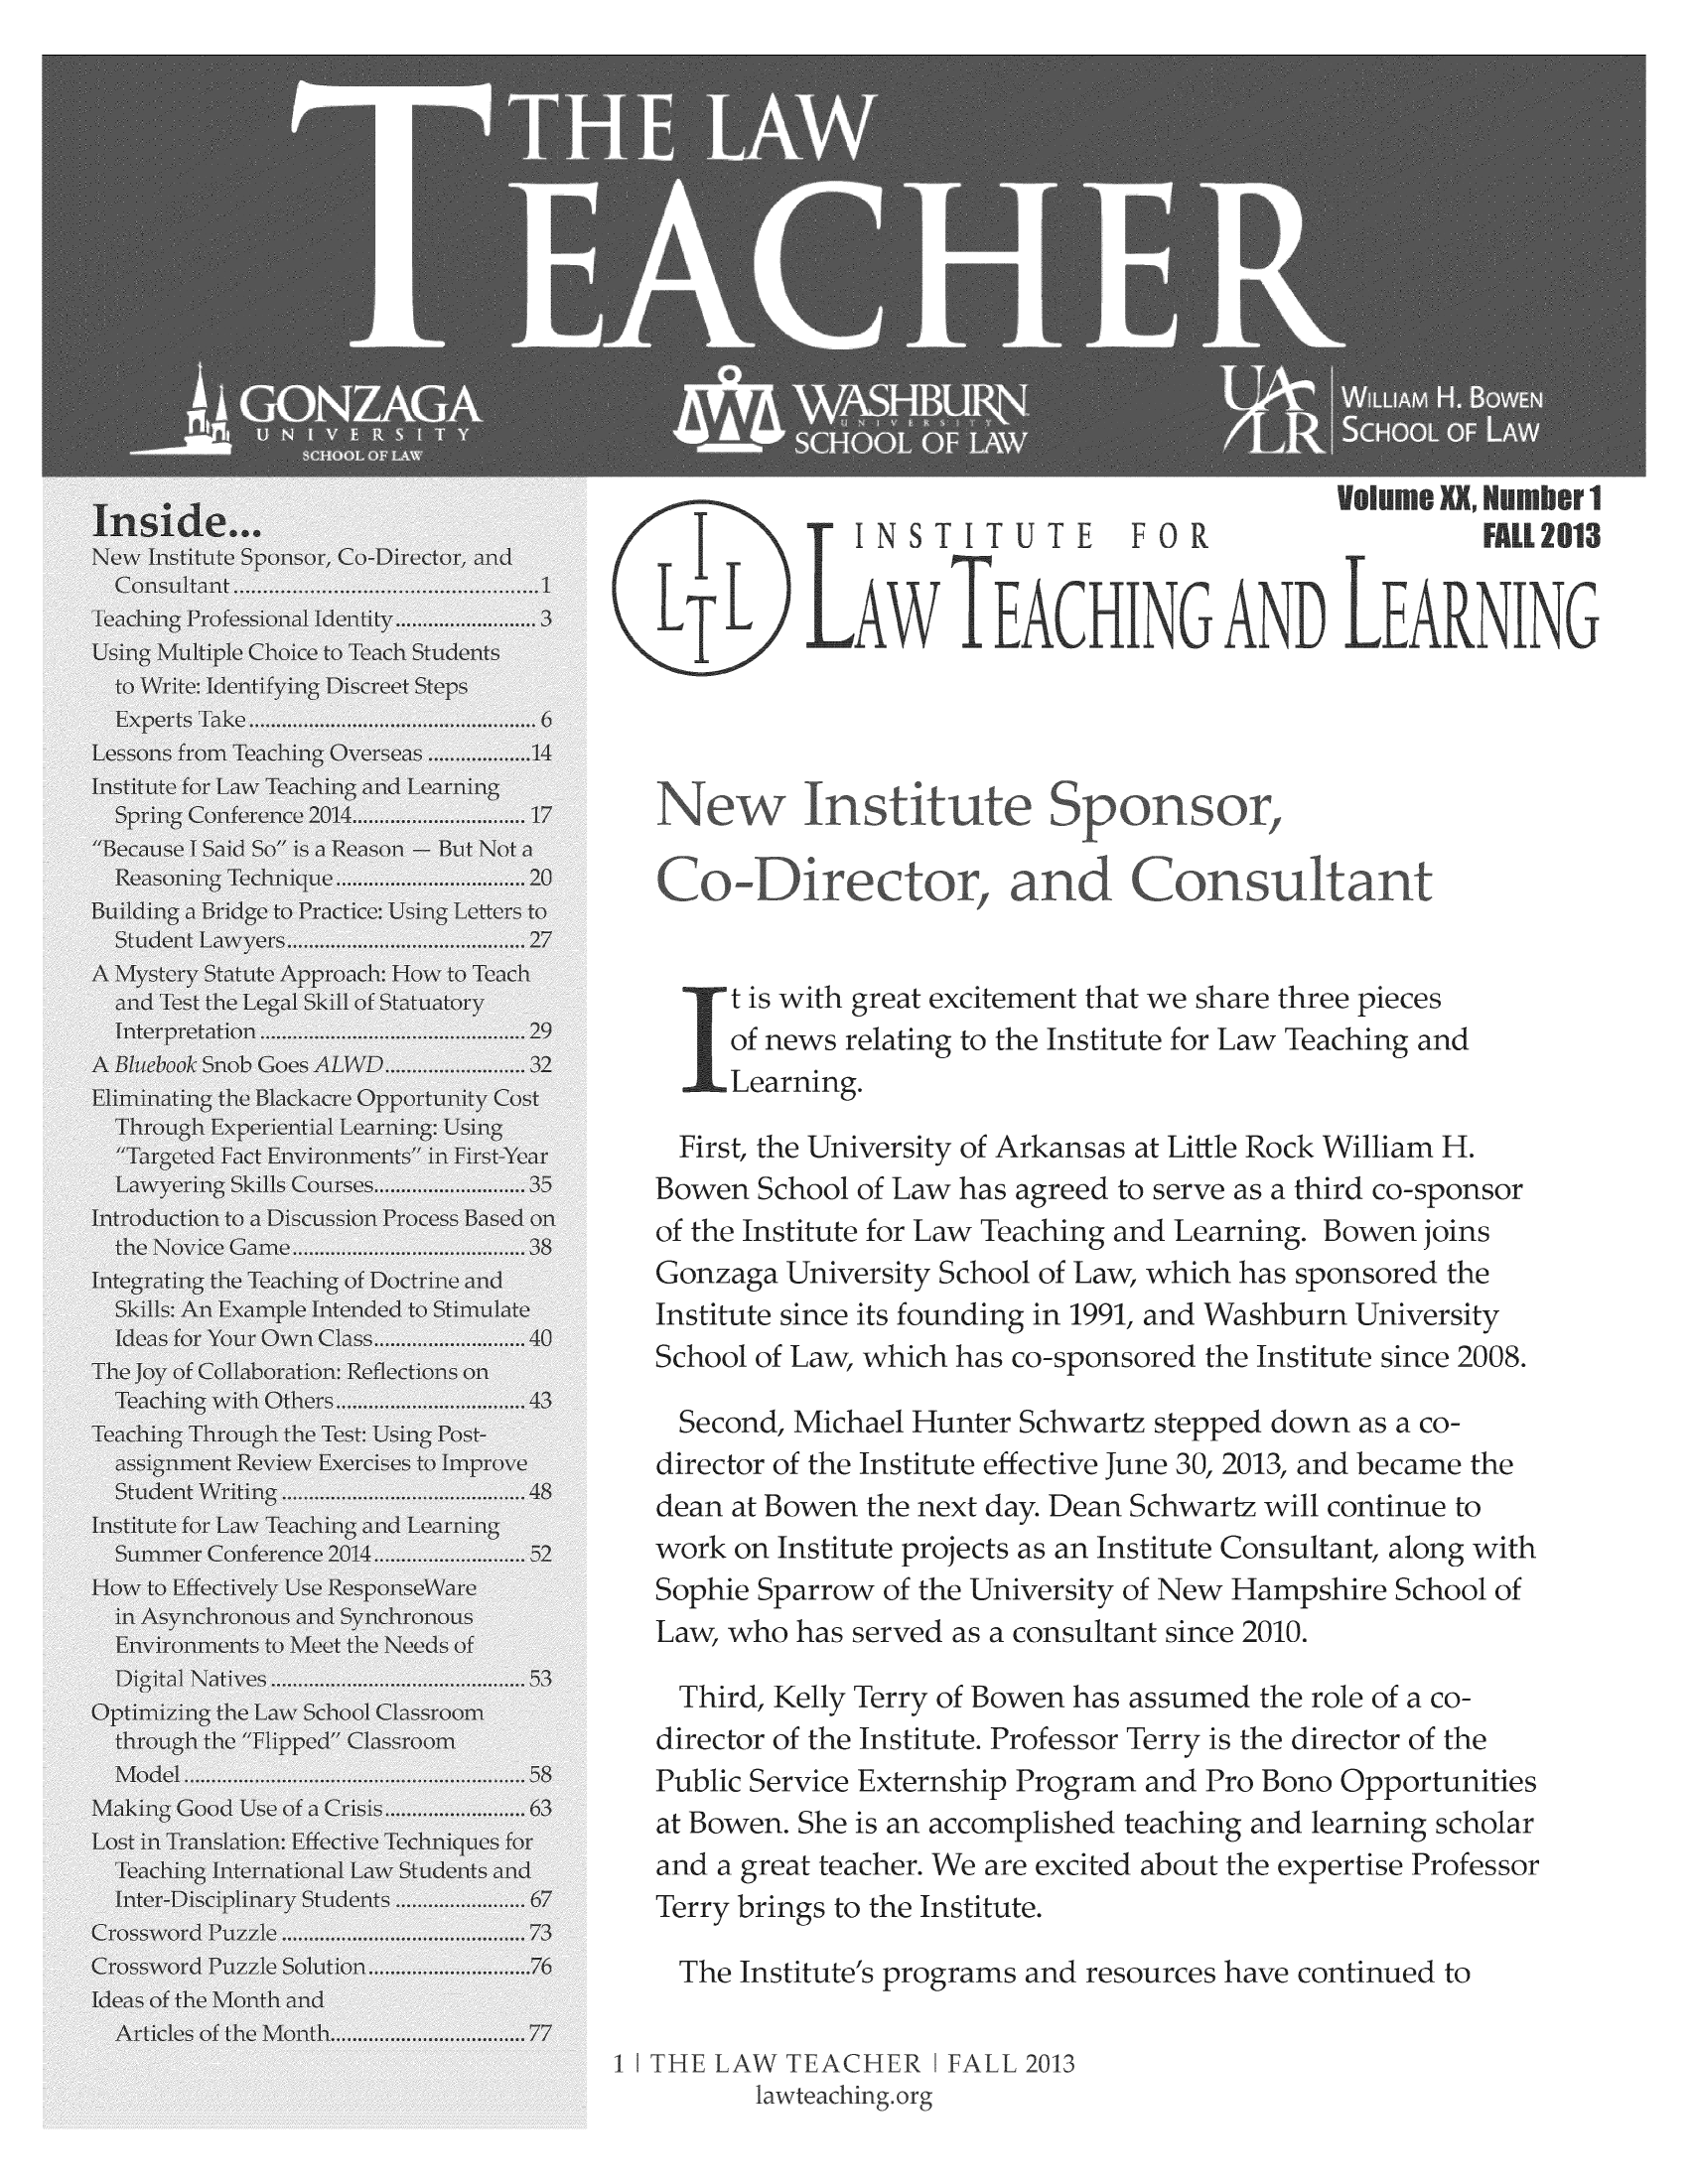 handle is hein.journals/lawteaer20 and id is 1 raw text is: t is with great excitement that we share three piecesof news relating to the Institute for Law Teaching andLearning.First, the University of Arkansas at Little Rock William H.Bowen School of Law has agreed to serve as a third co-sponsorof the Institute for Law Teaching and Learning. BowenjoinsGonzaga University School of Law, which has sponsored theInstitute since its founding in 1991, and Washburn UniversitySchool of Law, which has co-sponsored the Institute since 2008.Second, Michael Hunter Schwartz stepped down as a co-director of the Institute effective June 30, 2013, and became thedean at Bowen the next day. Dean Schwartz will continue towork on Institute projects as an Institute Consultant, along withSophie Sparrow of the University of New Hampshire School ofLaw, who has served as a consultant since 2010.Third, Kelly Terry of Bowen hsassumed the role of a co-director of the Institute. Professor Terry is the director of thePublic Service Externship Program and Pro Bono Opportunitiesat Bowen. She is an accomplished teaching and learning scholarand a great teacher. We are excited about the expertise ProfessorTerry brings to the Institute.The Institutes programs and resources have continued to